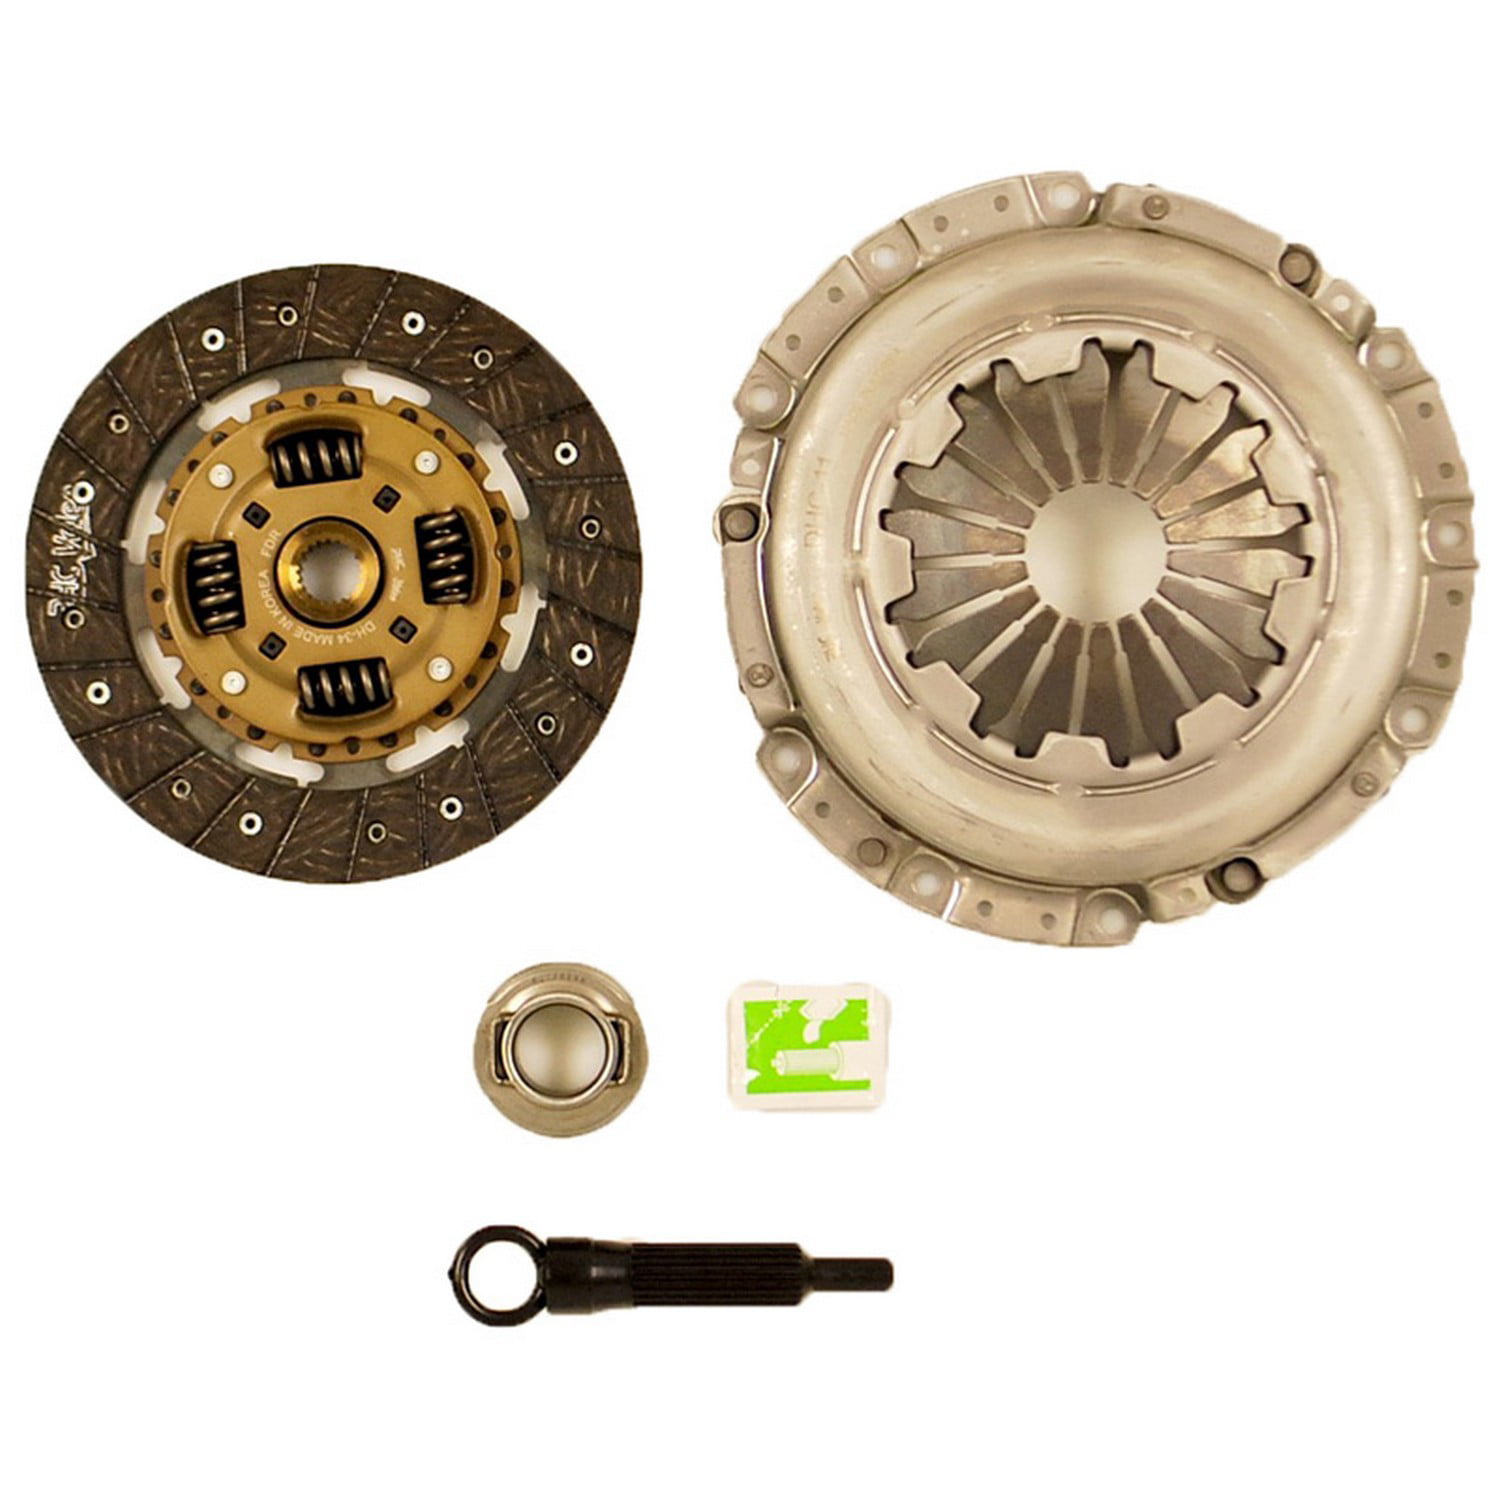 Valeo 52001601 OE Replacement Clutch Kit 